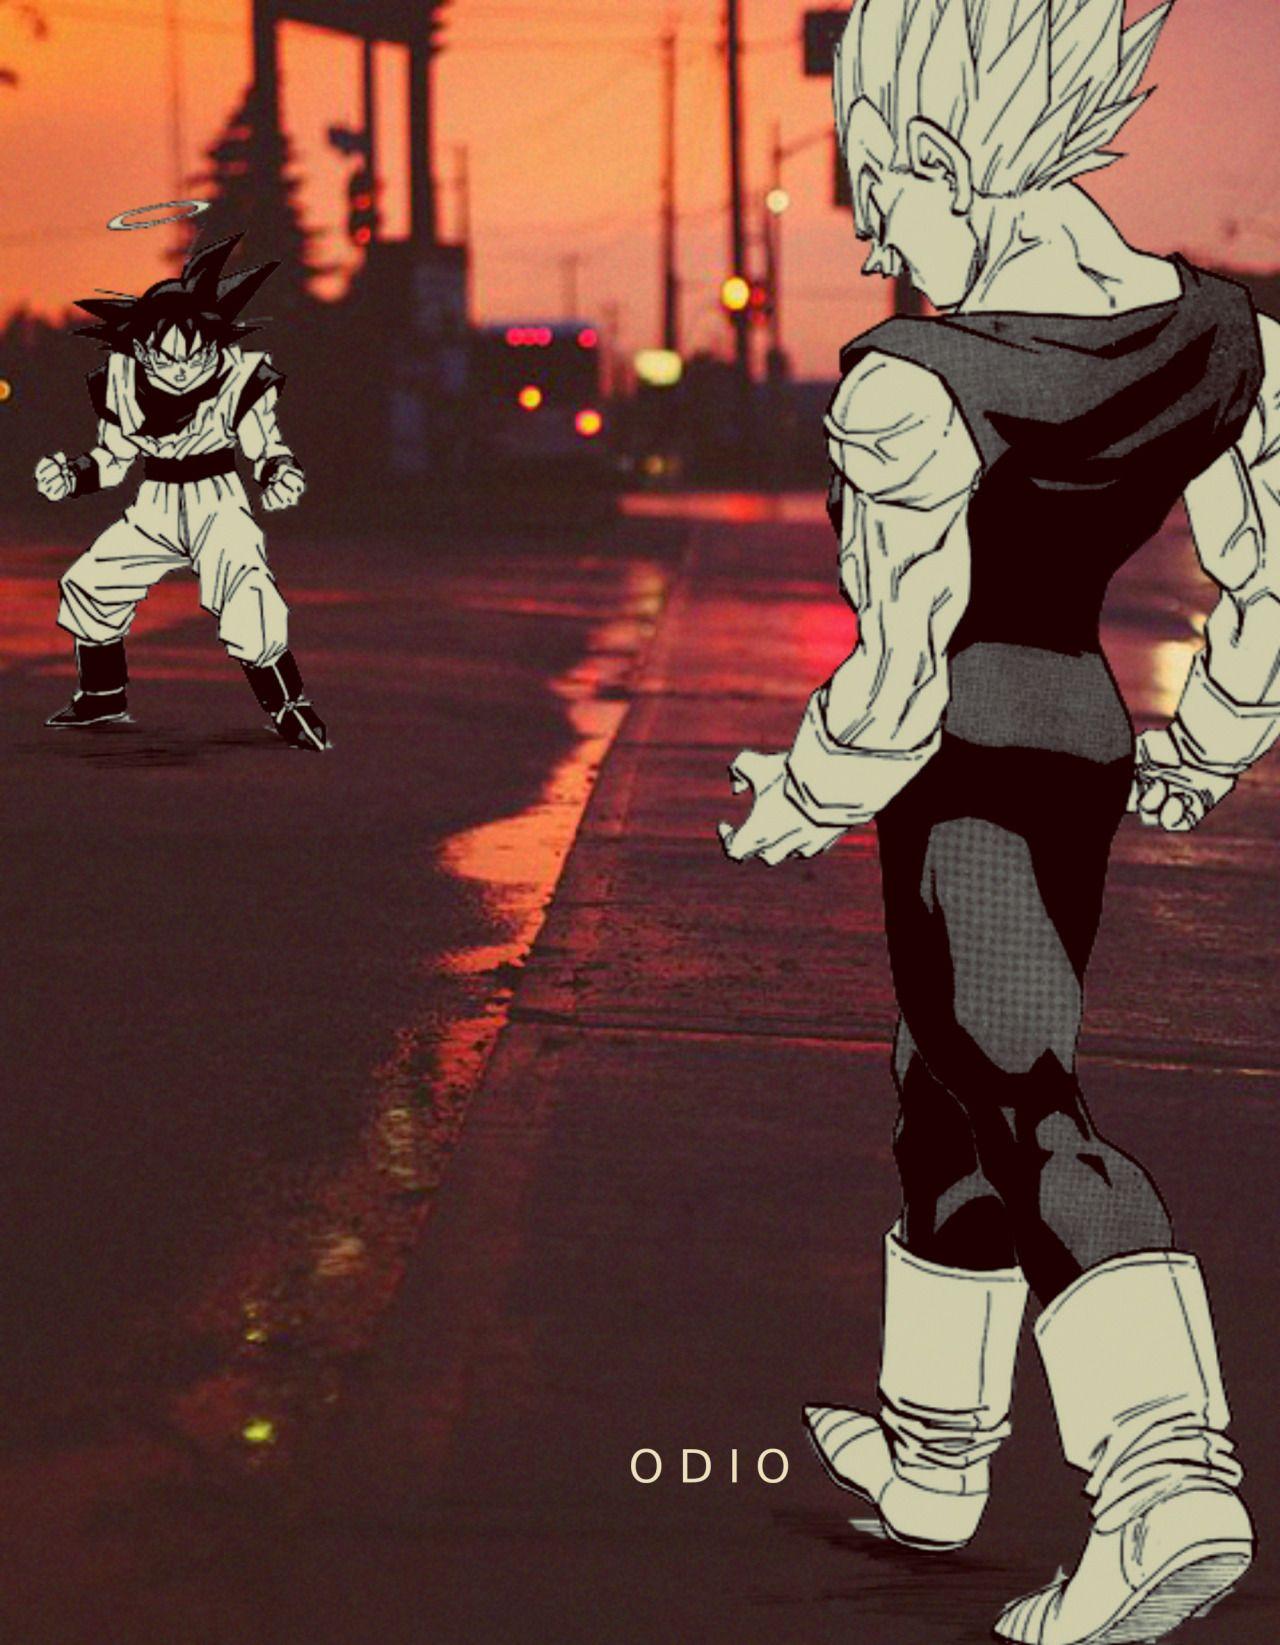 Dragon Ball Z Aesthetic Wallpapers - Wallpaper Cave